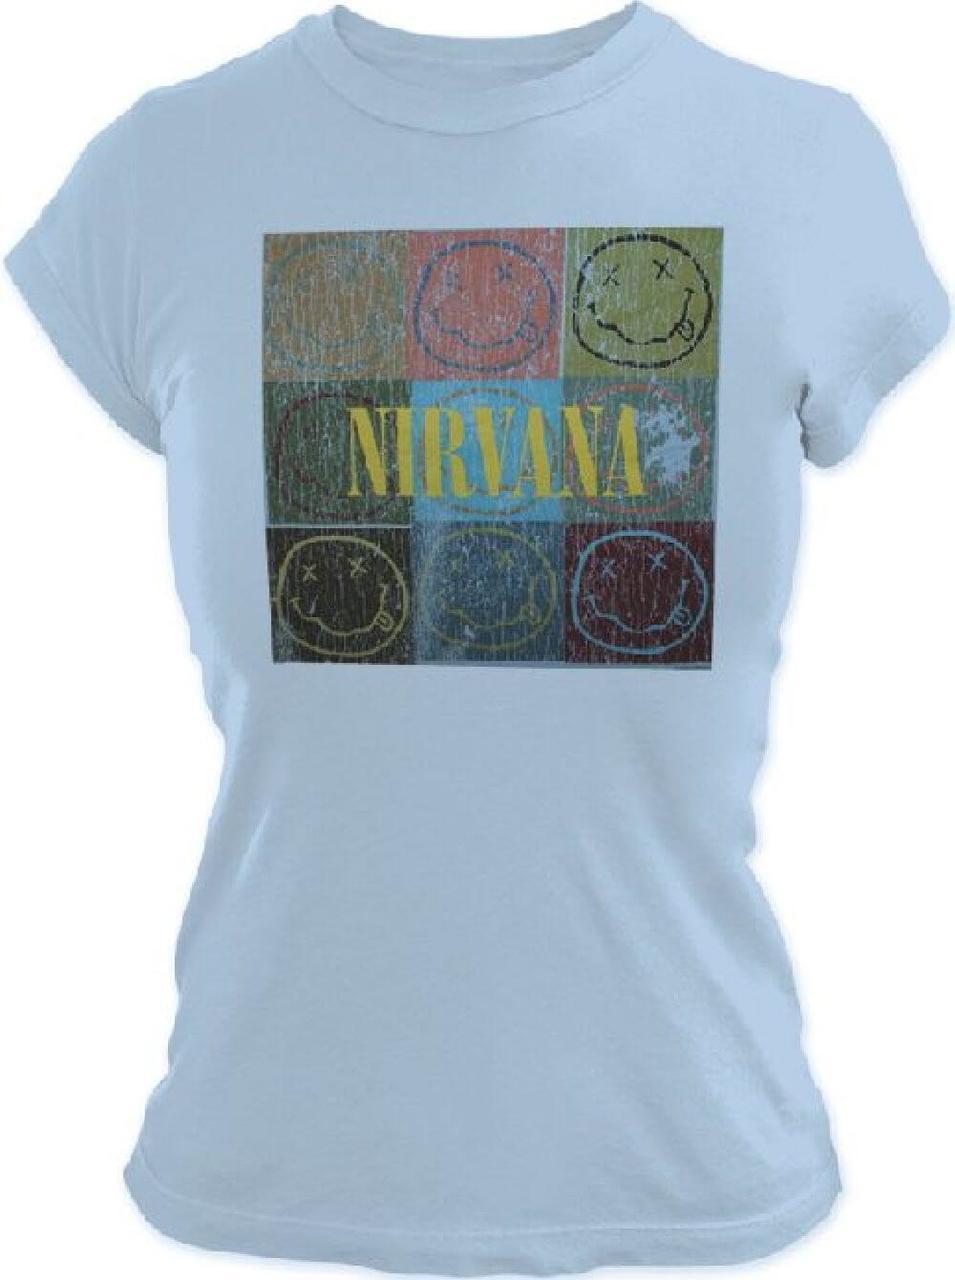 Square with Faces Logo - Nirvana Smiley Face Logo In Colored Boxes Women's Blue T Shirt